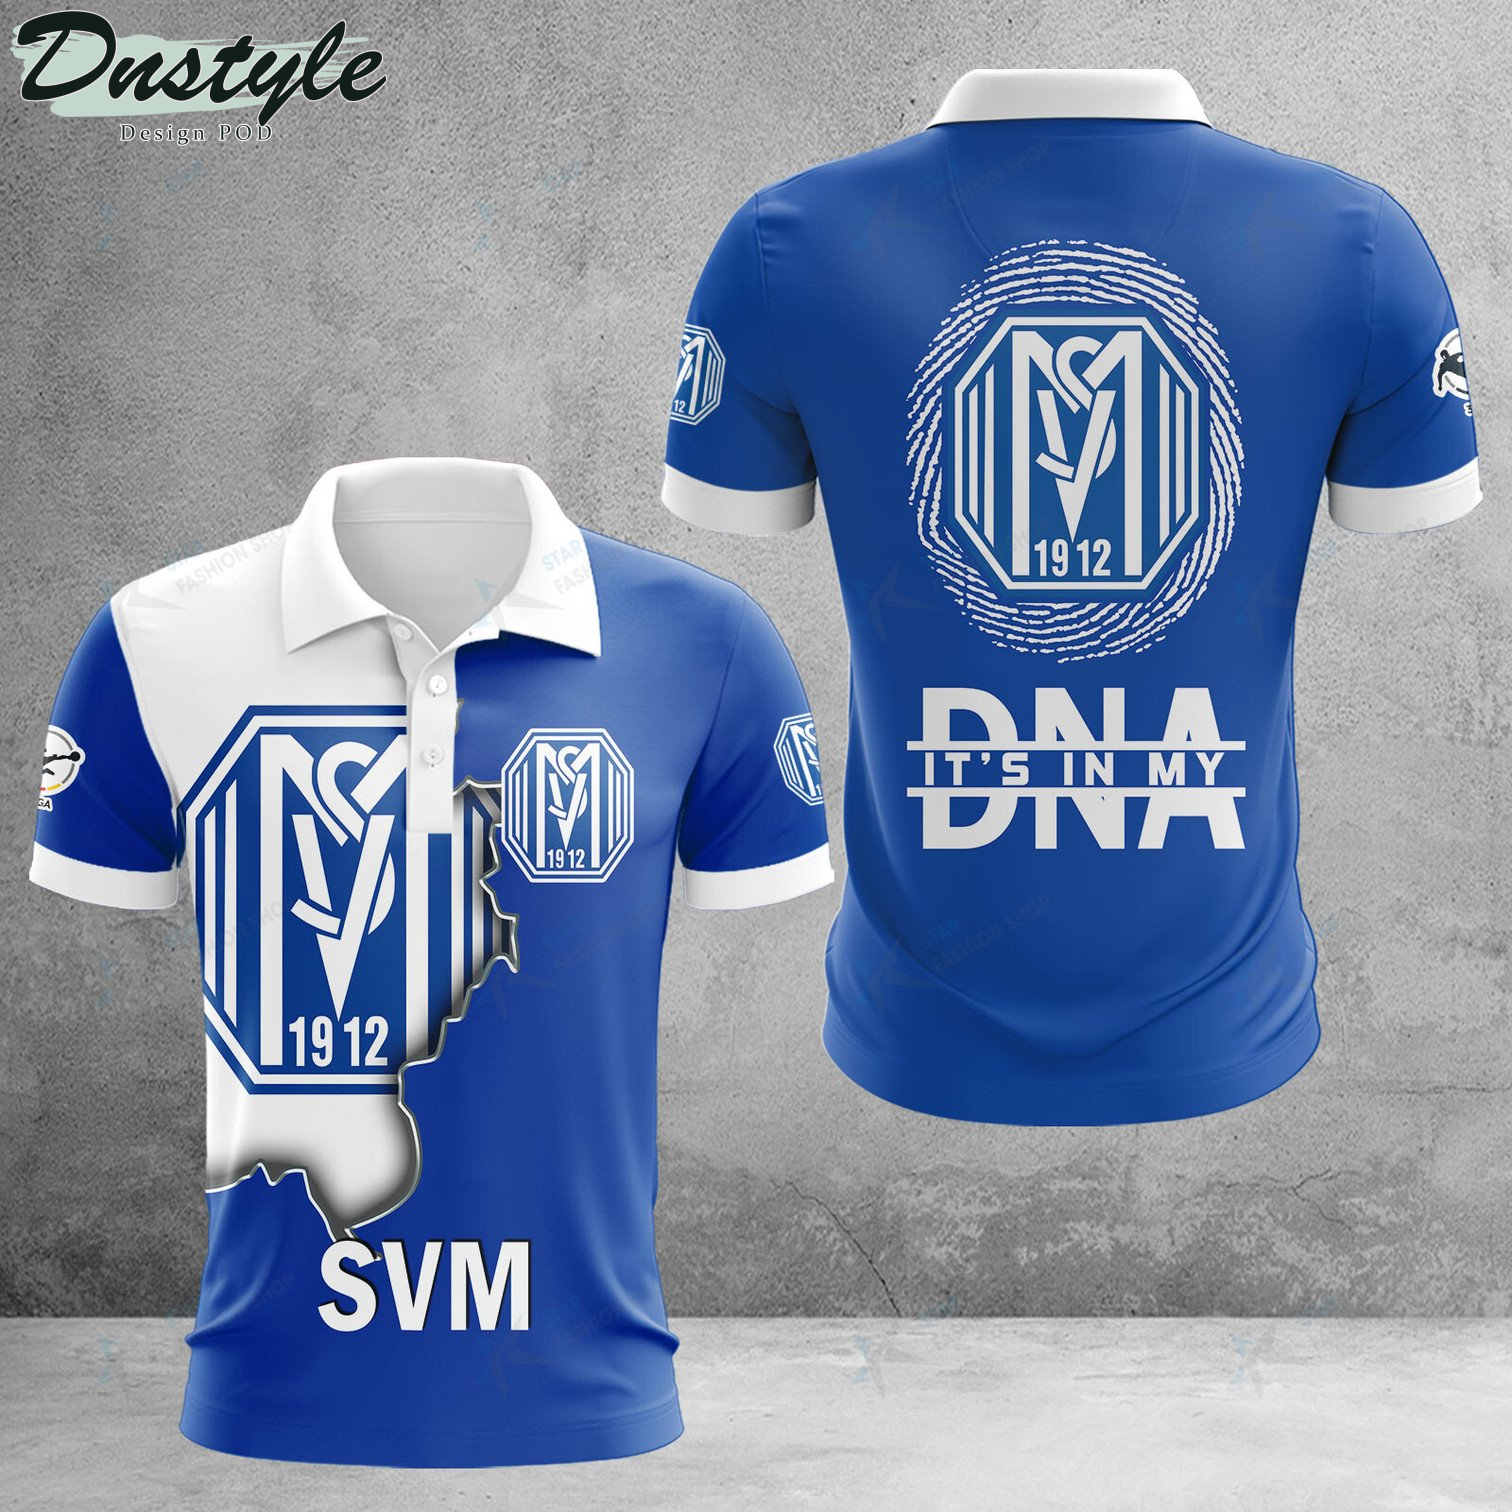 SV Meppen it's in my DNA polo shirt